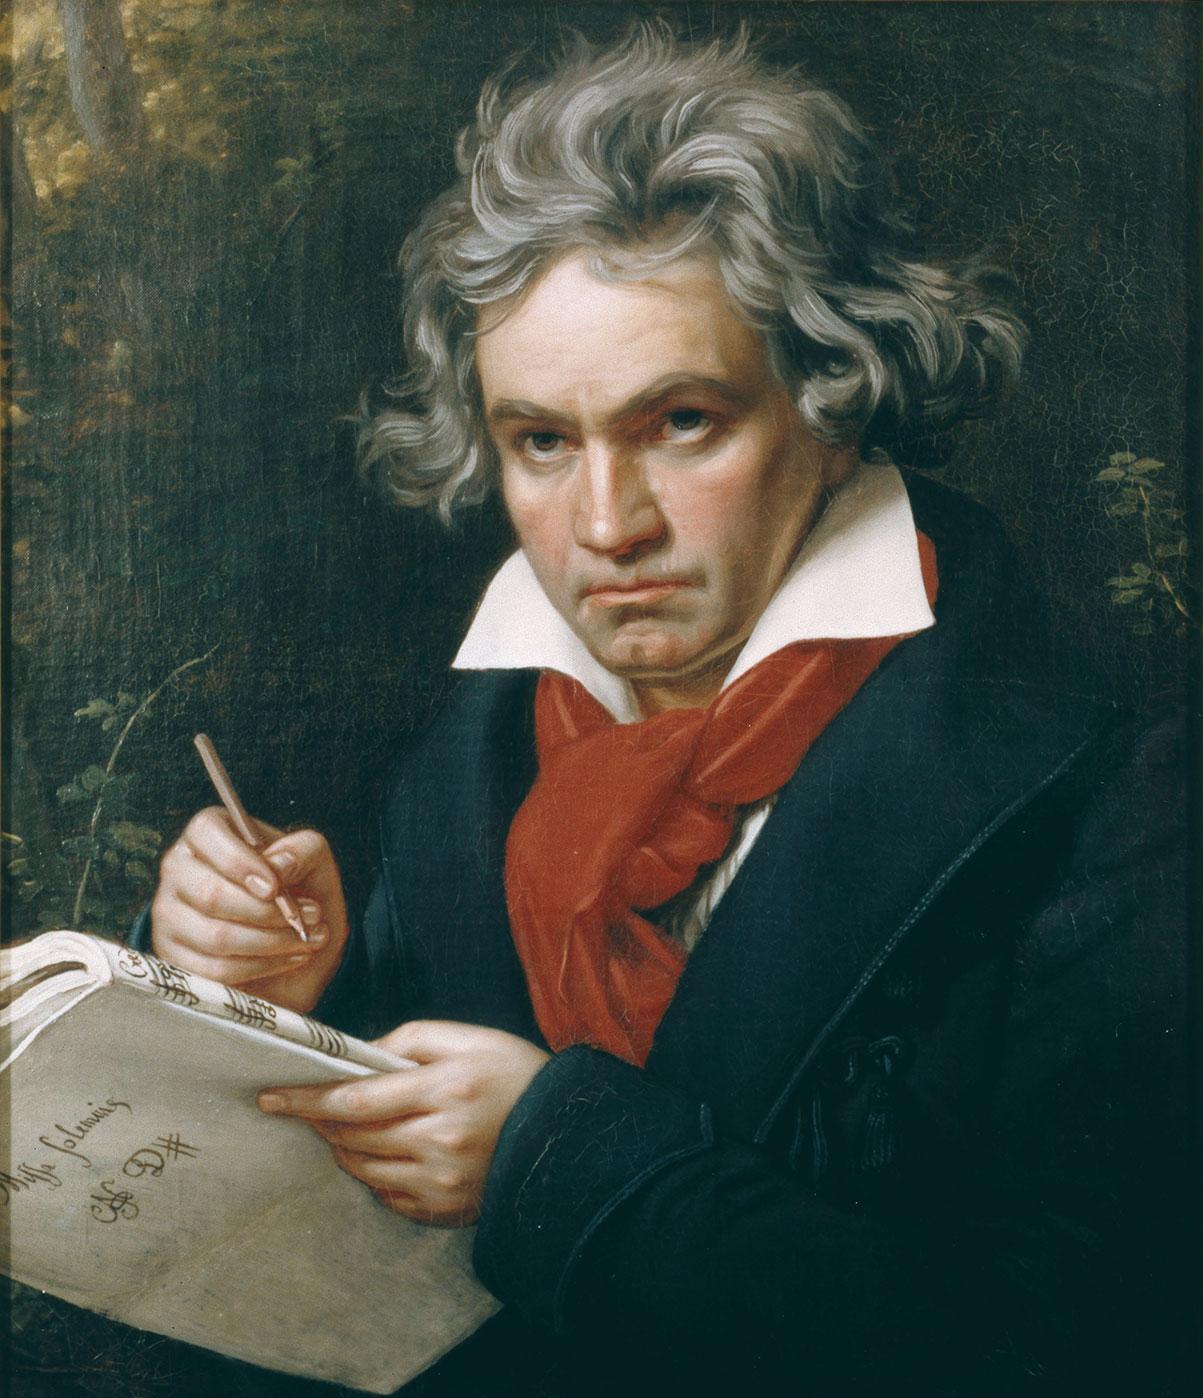 Portrait painting of the composer Ludwig van Beethoven. He is wearing a dark coat and a red scarf. He looks thoughtful, holding a pencil and a music book in his hands.